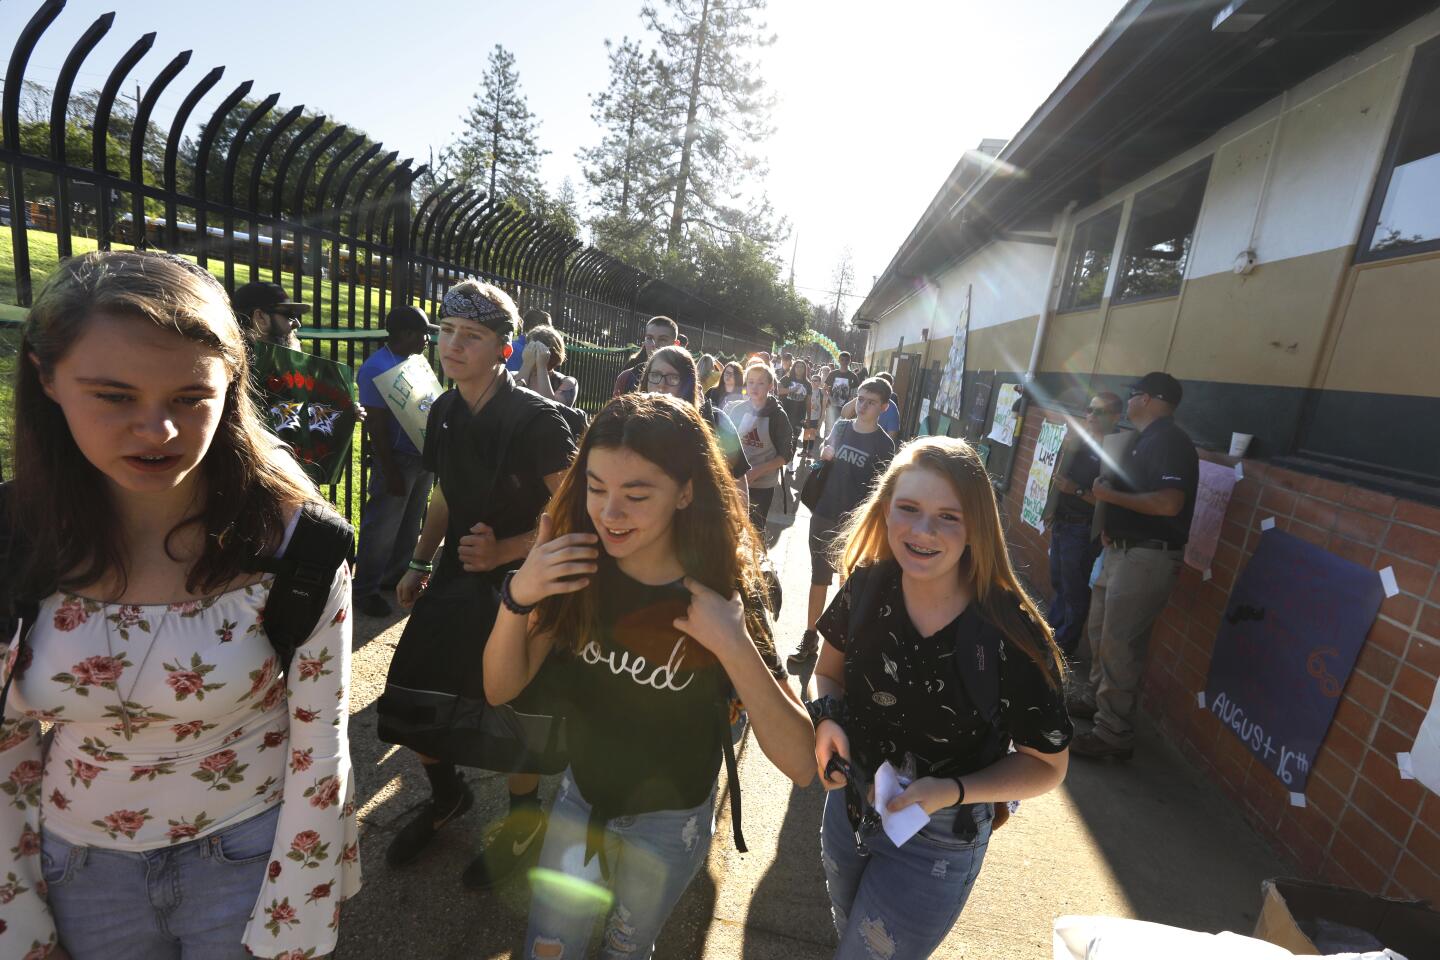 PARADISE, CA - AUGUST 15, 2019 - - Students return to class at Paradise High School months after the Camp Fire ravaged the community in Paradise, California on August 15, 2019. The Camp Fire was the deadliest and most destructive wildfire in California history. 84 people died in the fire and two other residents died later of their injuries. (Genaro Molina / Los Angeles Times)